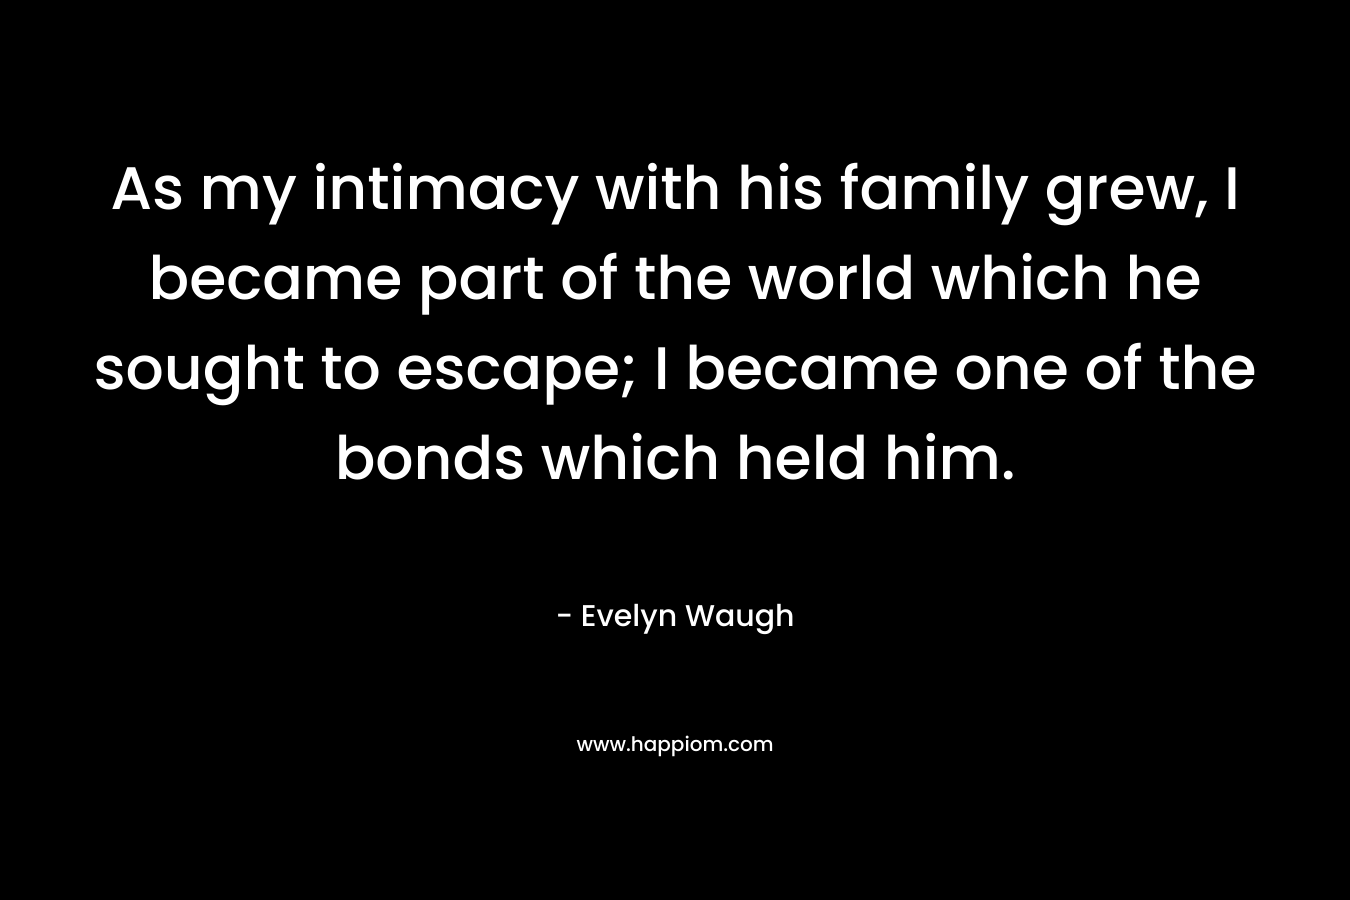 As my intimacy with his family grew, I became part of the world which he sought to escape; I became one of the bonds which held him.